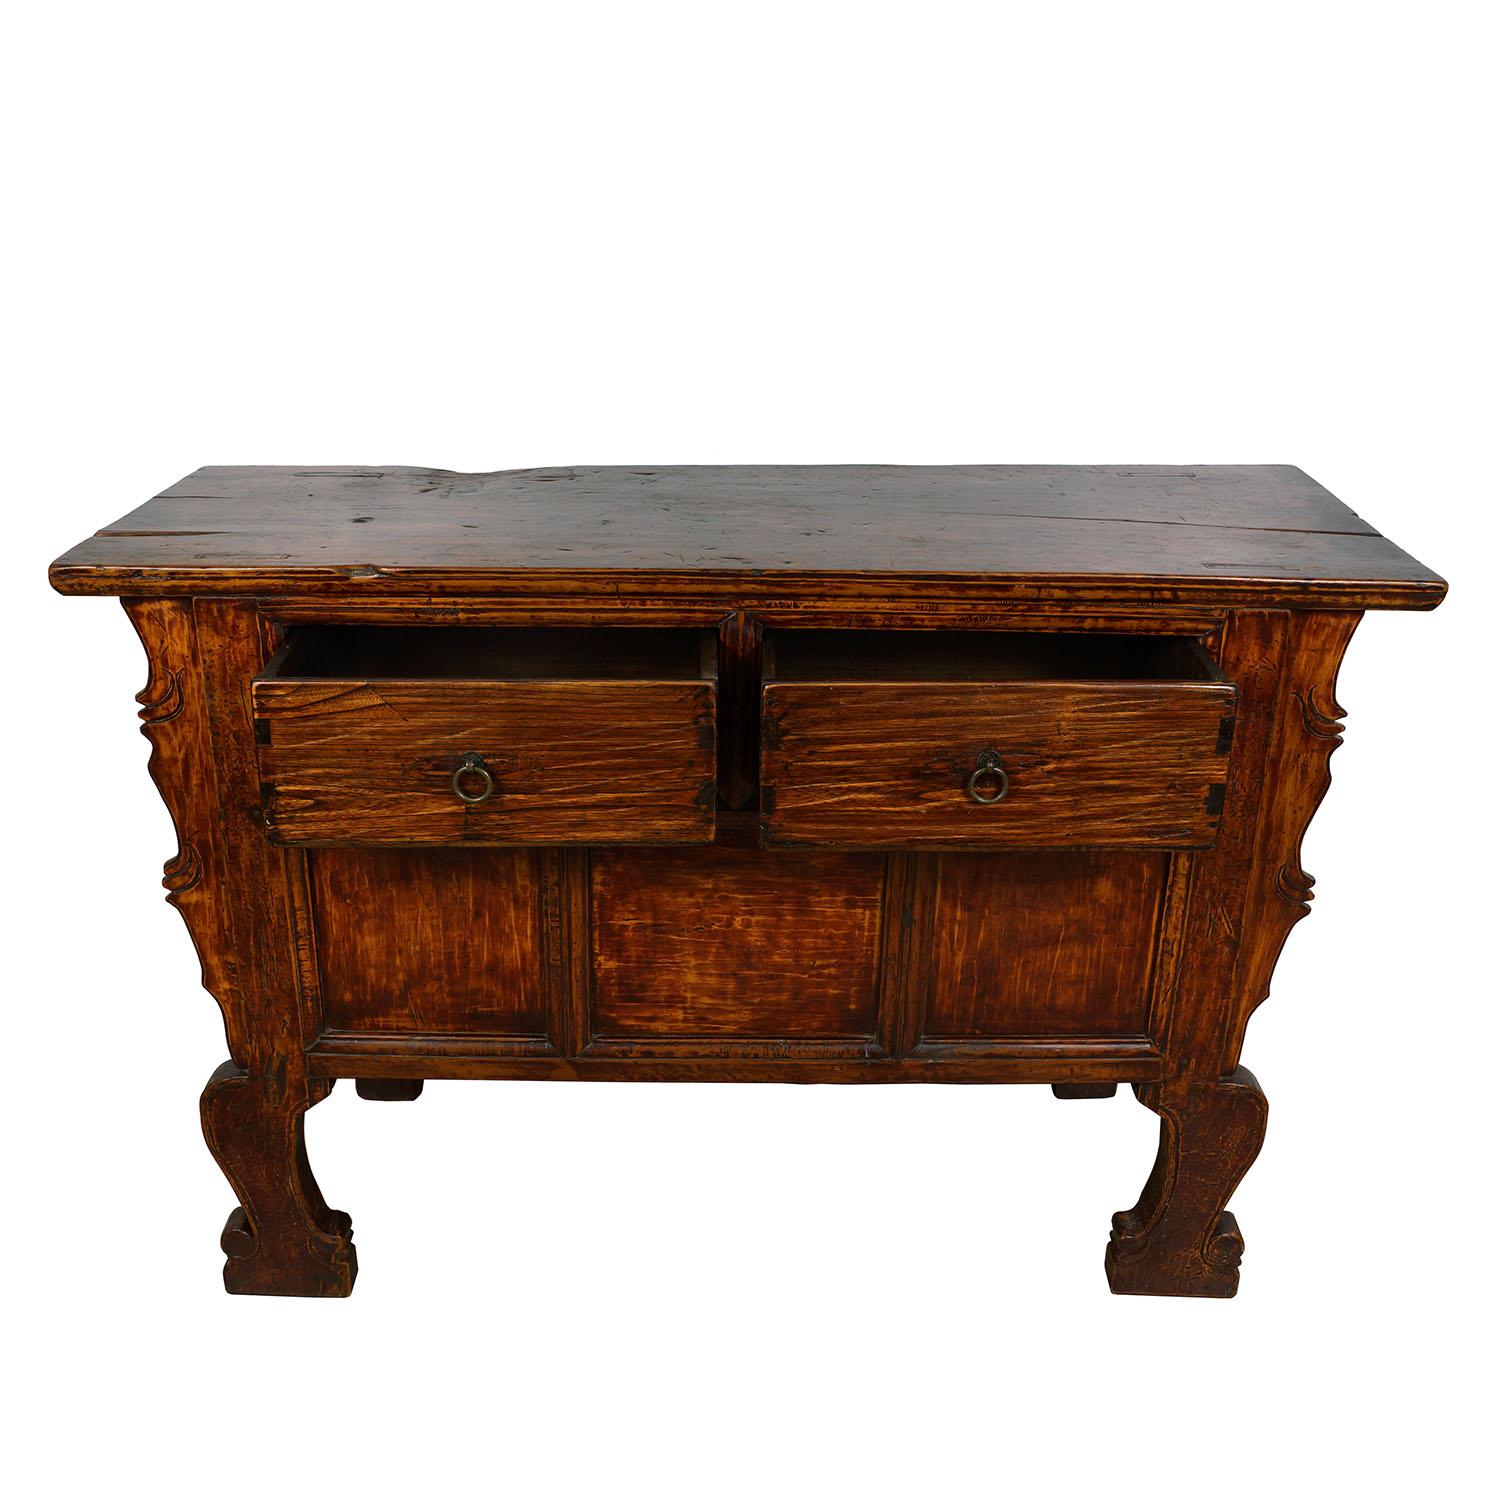 Chinese Export 19th Century Antique Chinese Credenza, Sideboard, Buffet Table For Sale